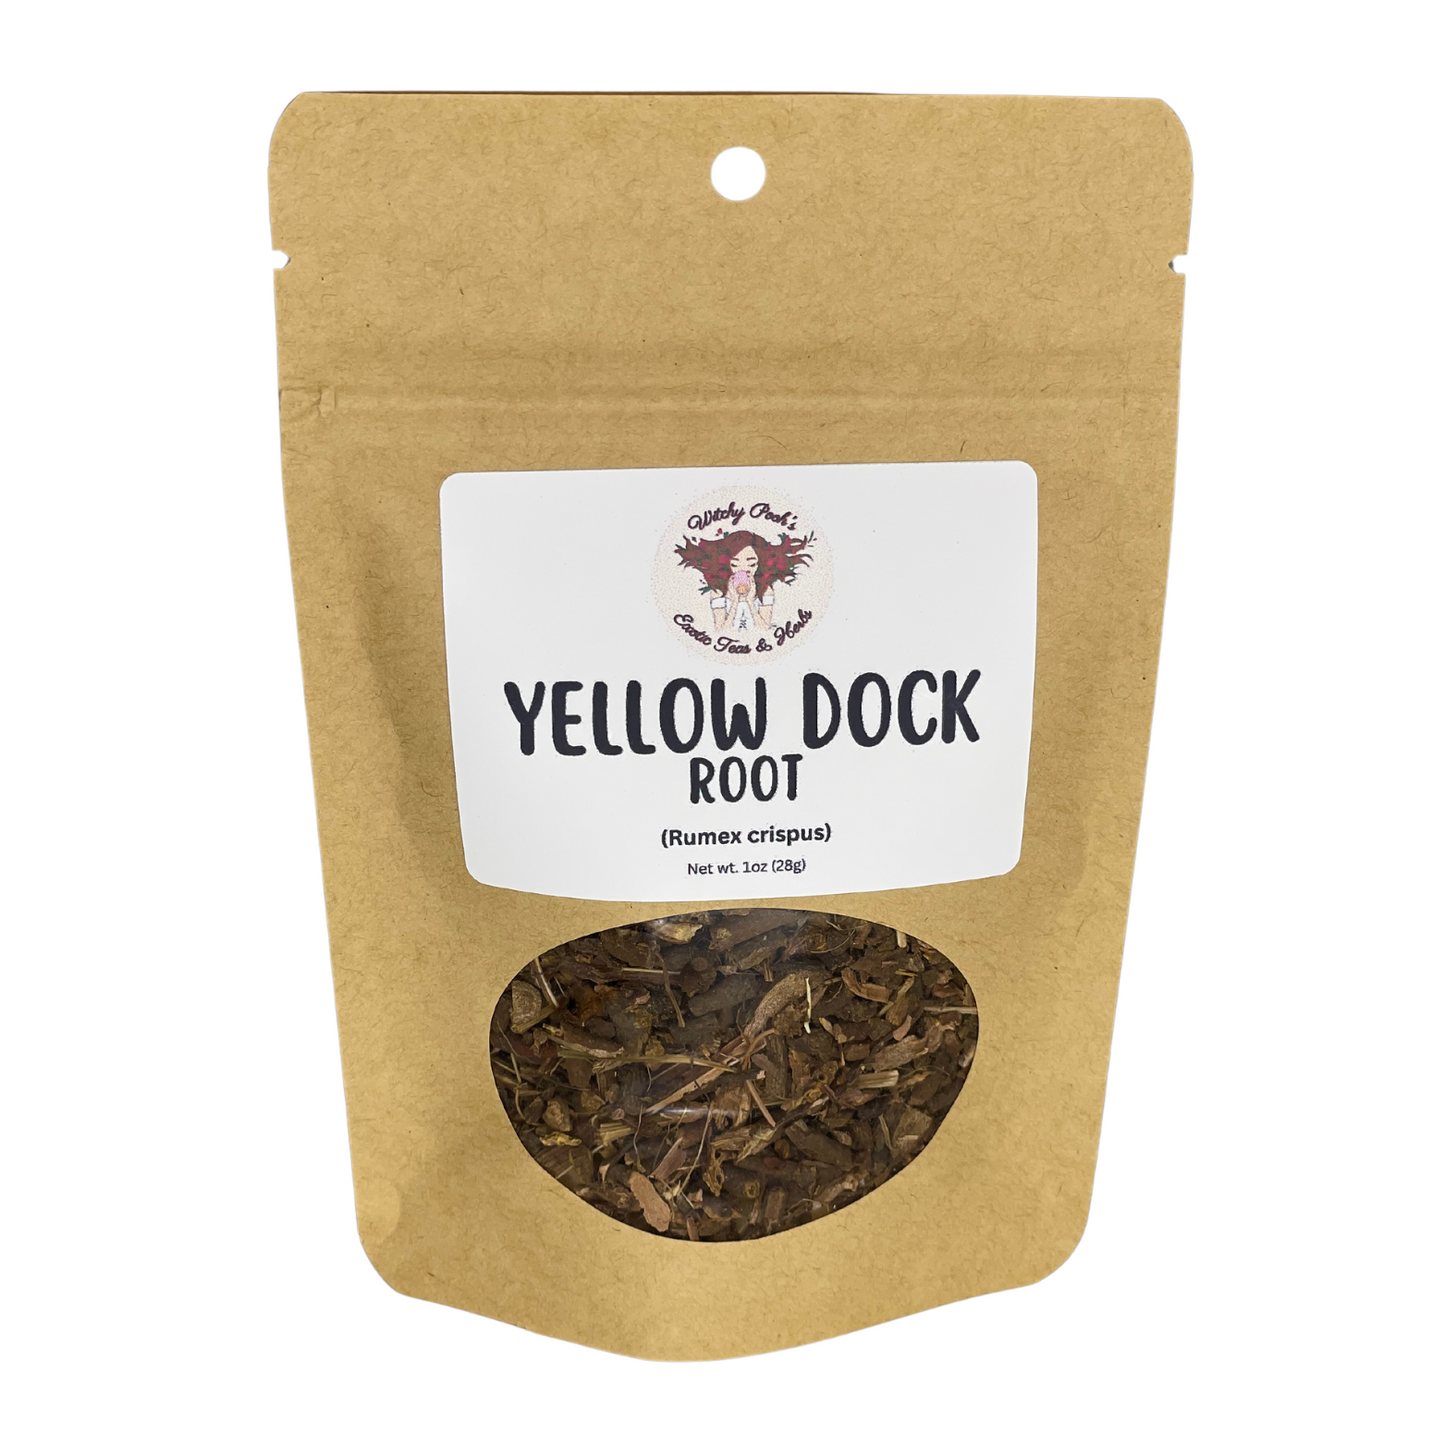 Witchy Pooh's Yellow Dock Root For Blood Purification, Smudging For Ritual to Release Past Traumas